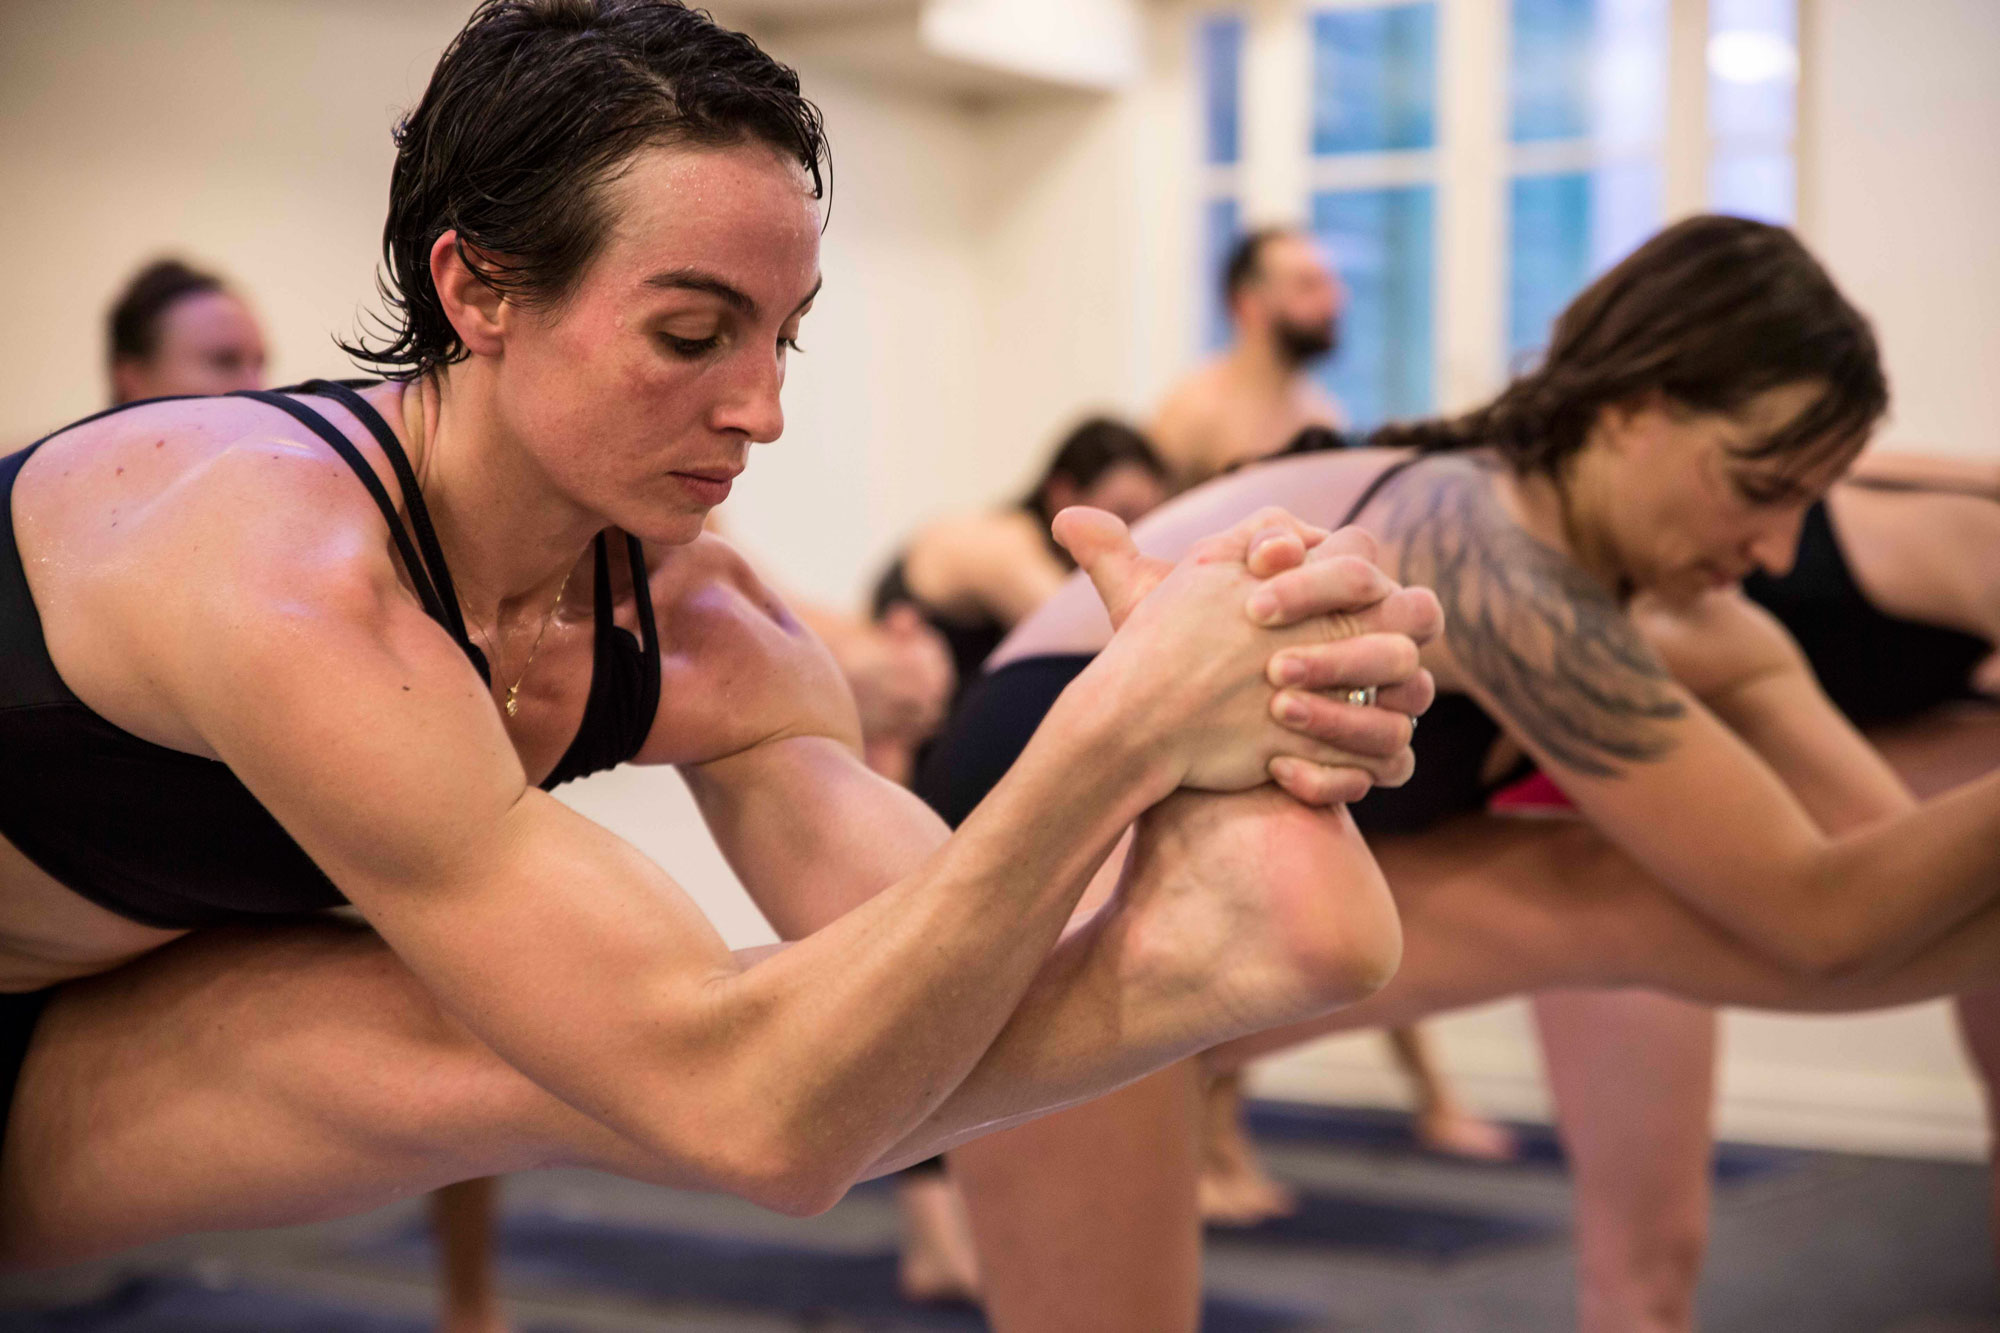 Hot or not? Bikram no more beneficial than any other yoga, says vascular  study | Medical research | The Guardian